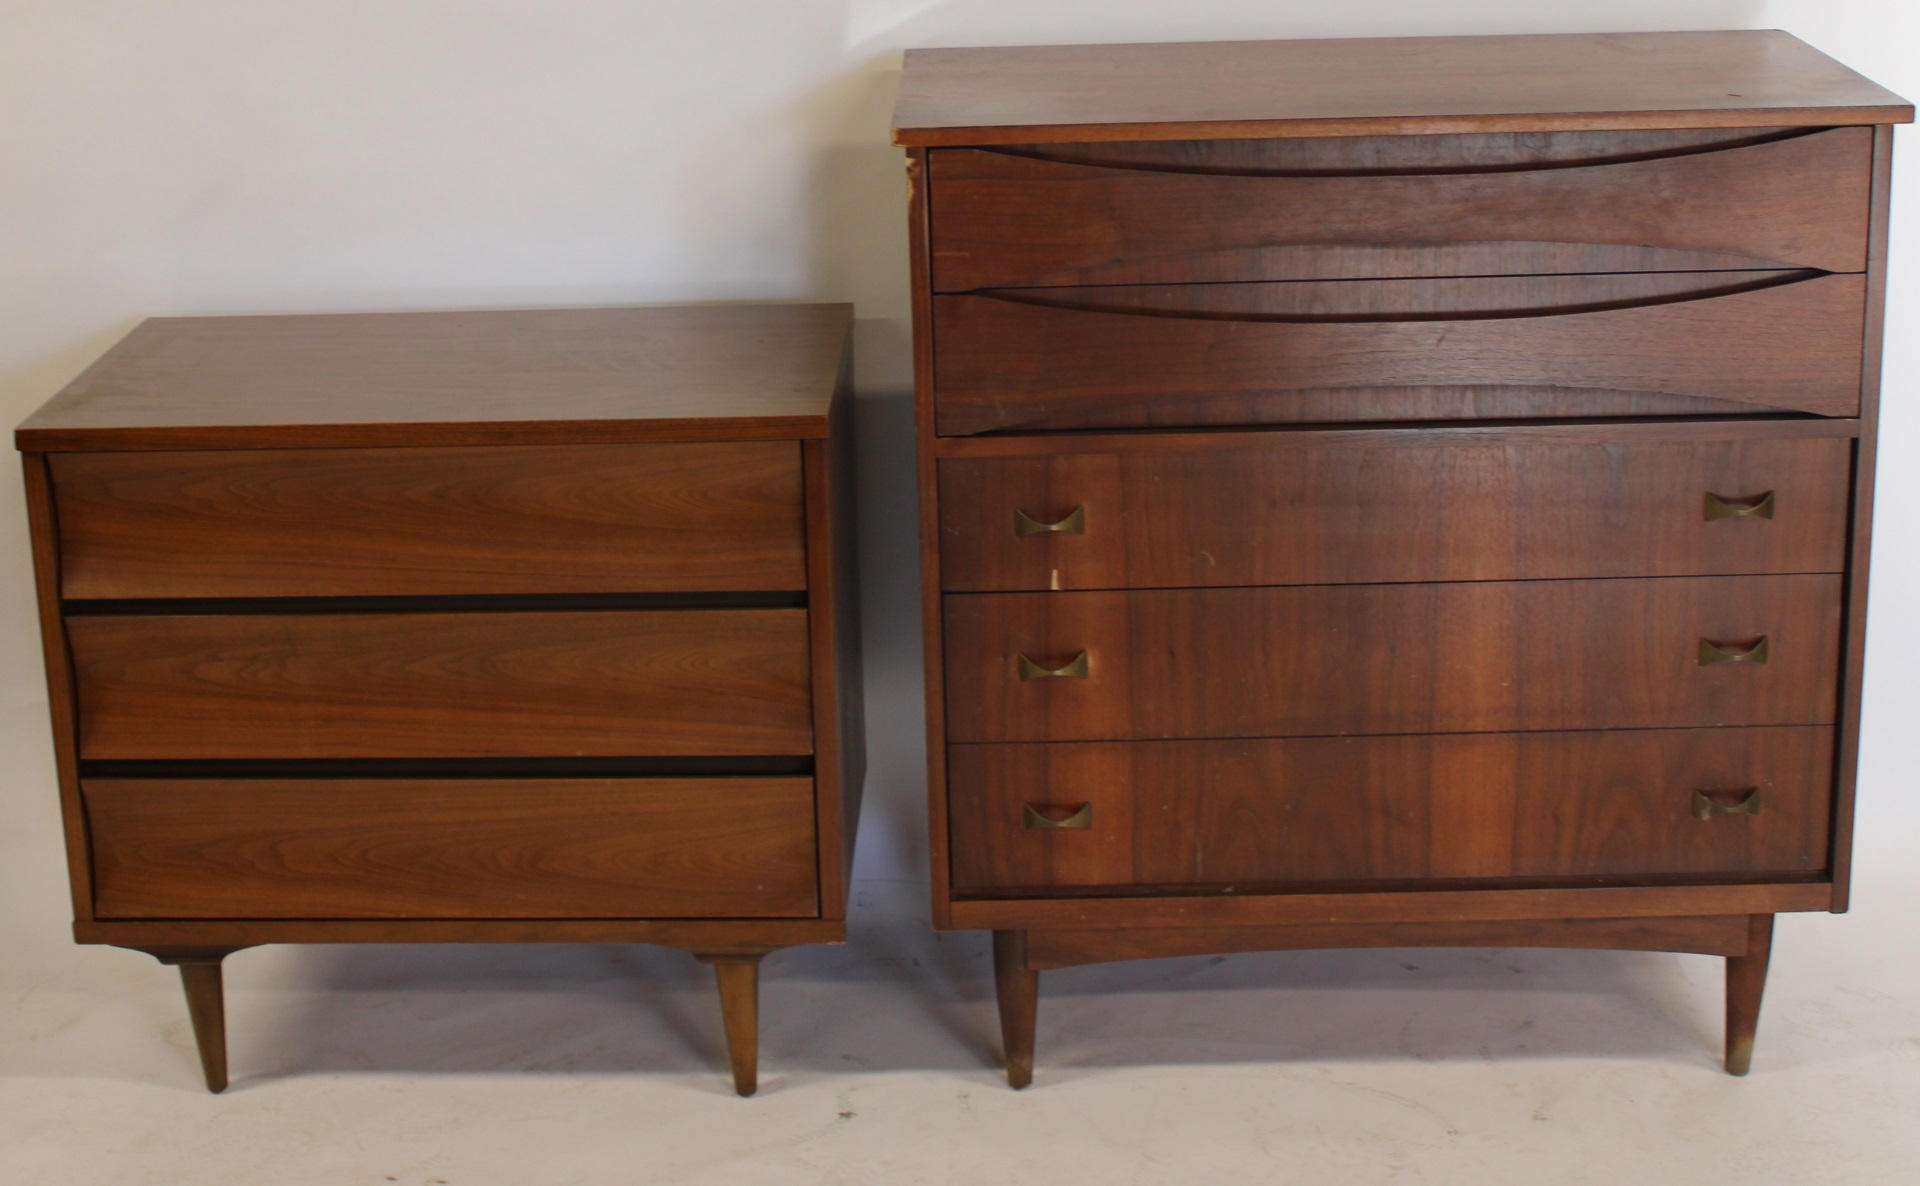 MIDCENTURY TALL AND LOW DRESSERS.